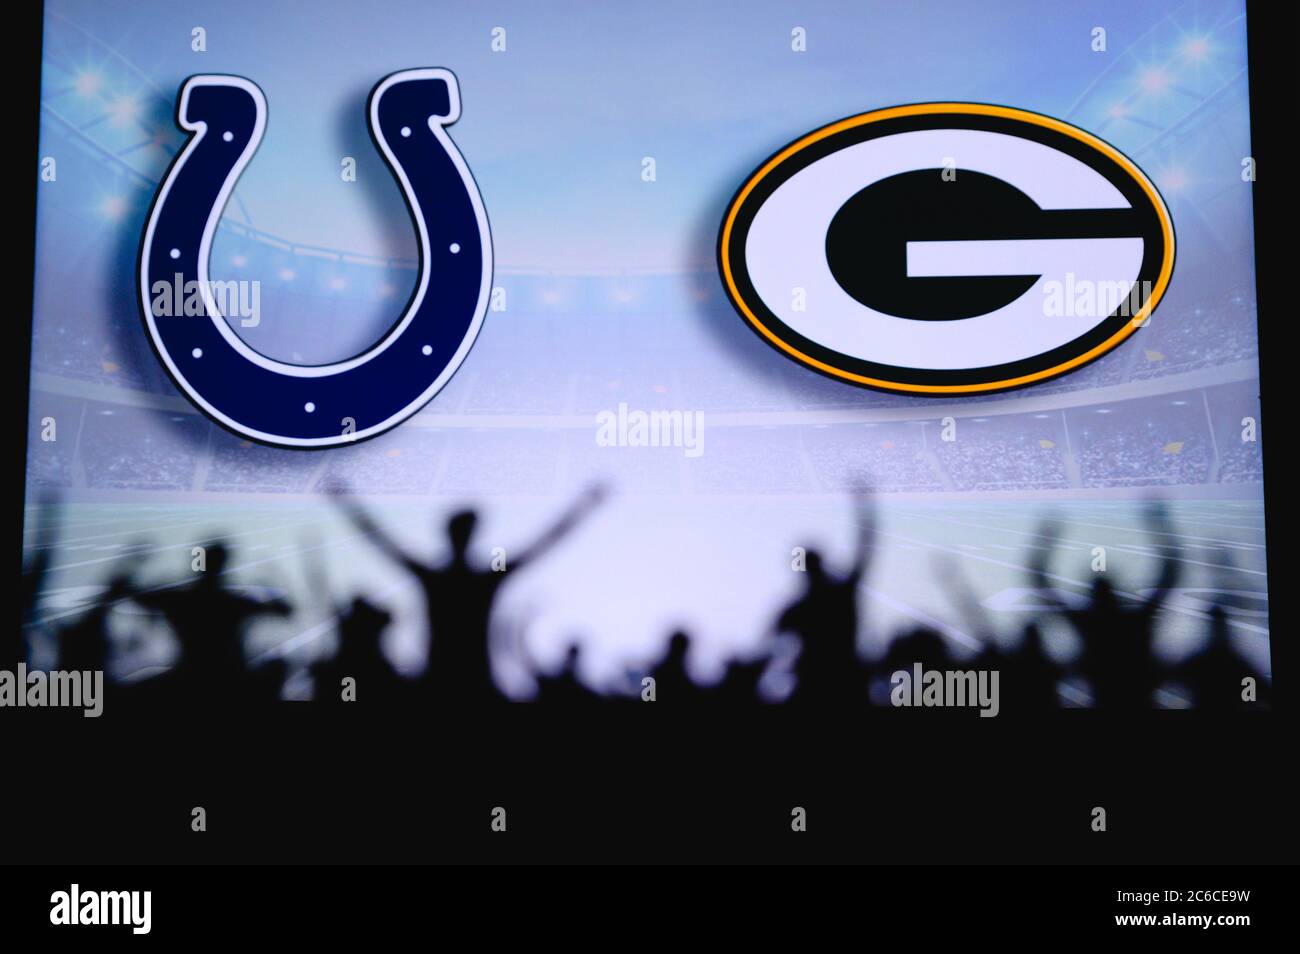 Indianapolis Colts vs. Green Bay Packers. Fans support on NFL Game. Silhouette of supporters, big screen with two rivals in background. Stock Photo